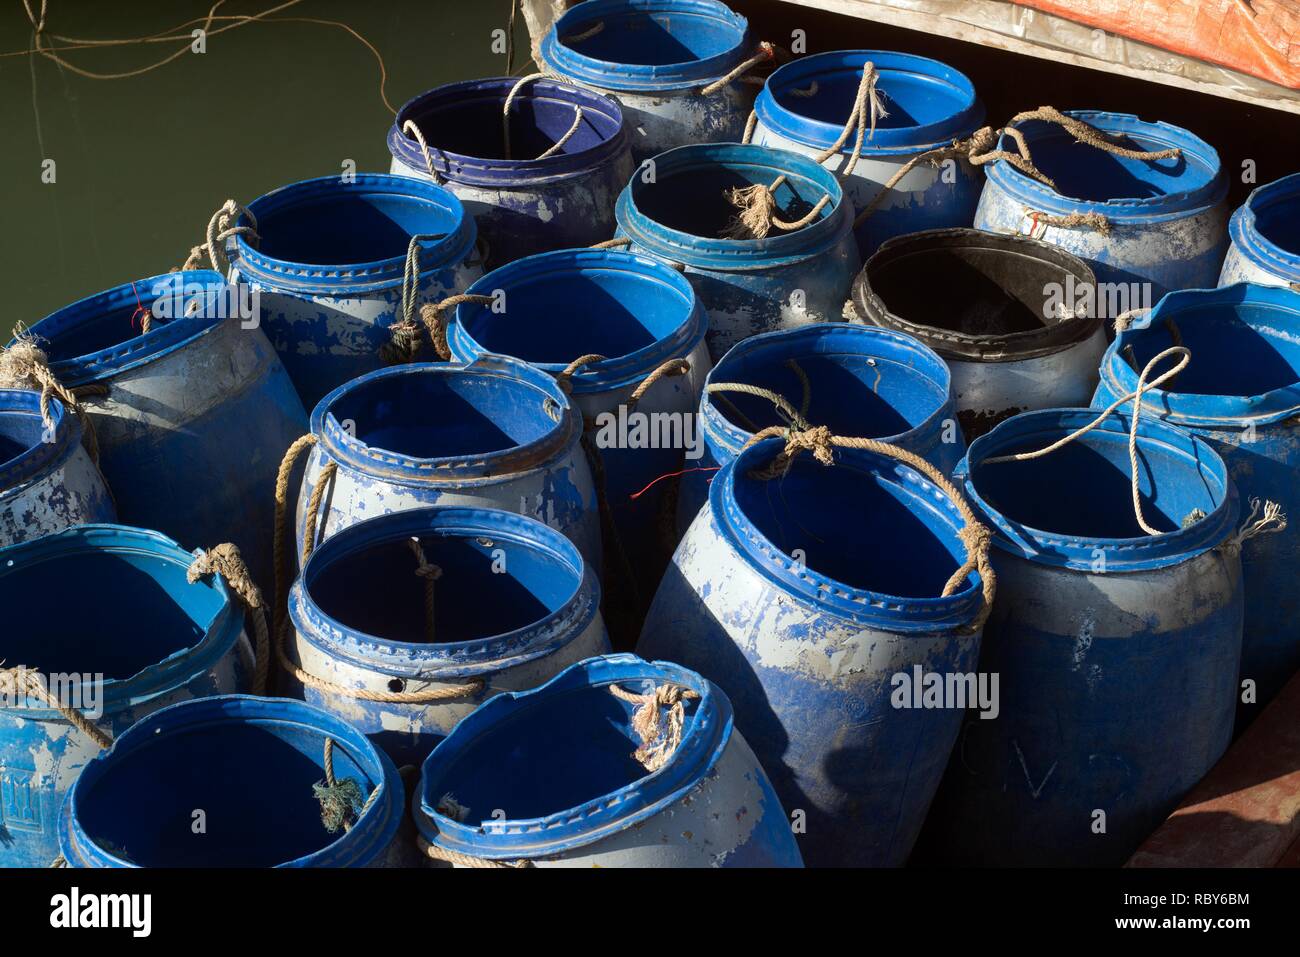 https://c8.alamy.com/comp/RBY6BM/large-plastic-fish-bucket-crates-on-a-fishing-boat-RBY6BM.jpg